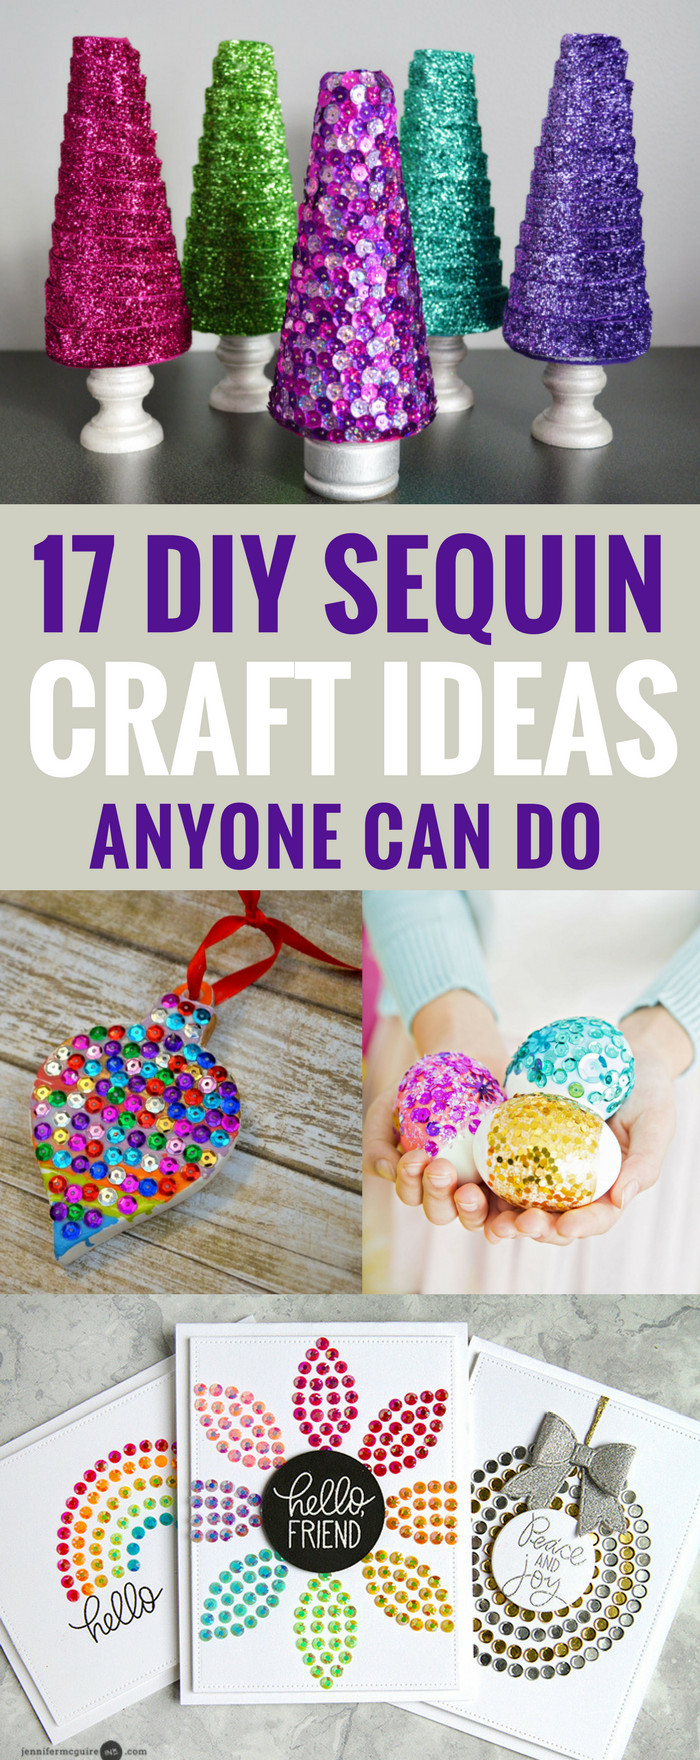 DIY Kids Project
 17 DIY Sequin Crafts Ideas Anyone Can Do